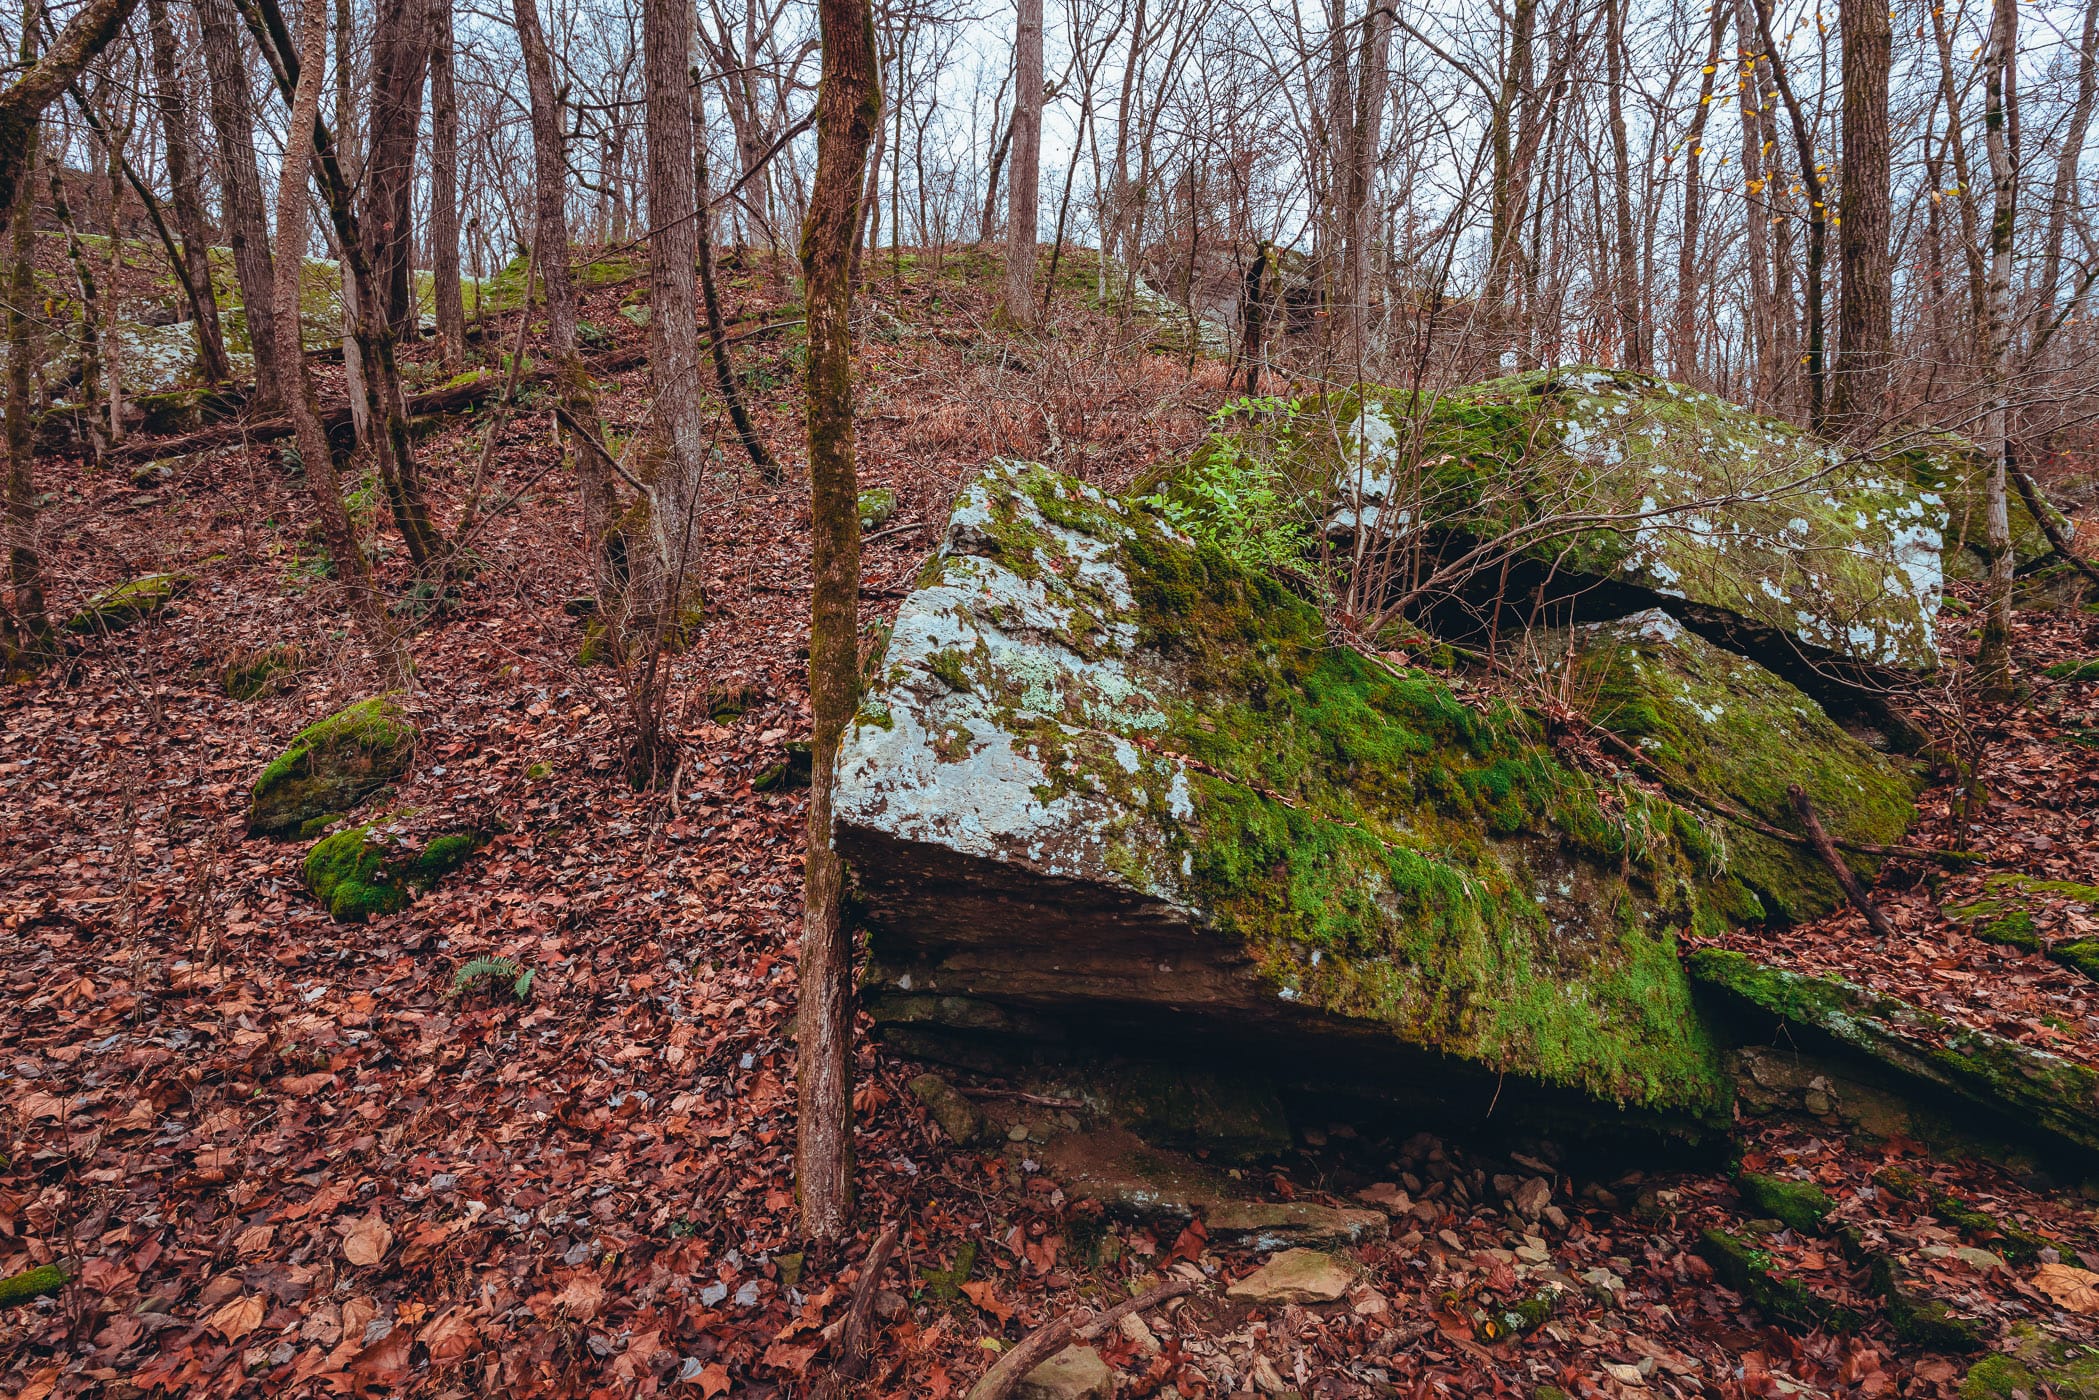 Rocks covered in moss in the forest at Arkansas' Devil's Den State Park.